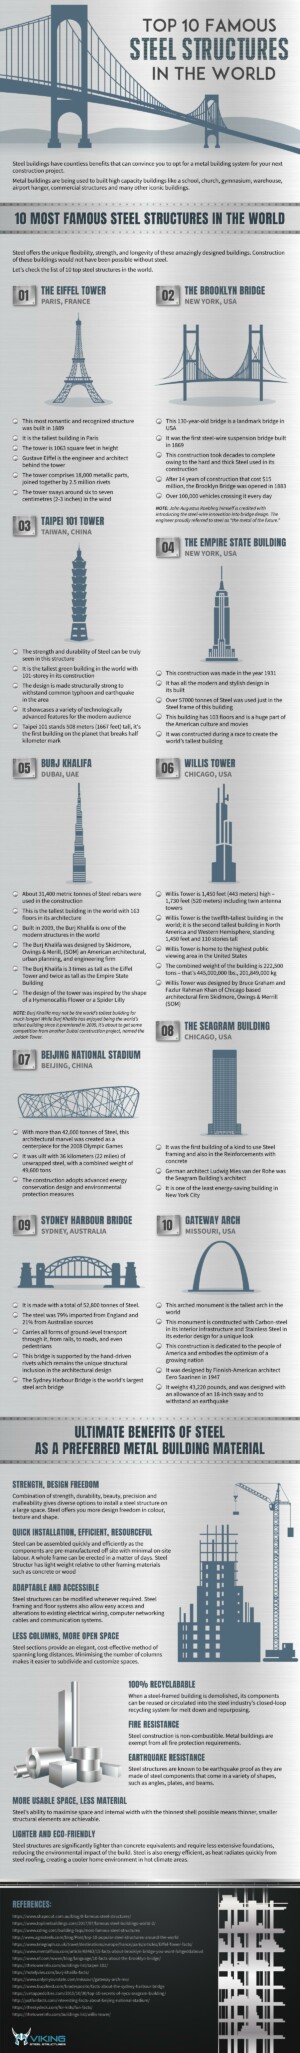 Top 10 Famous Steel Structures in The World